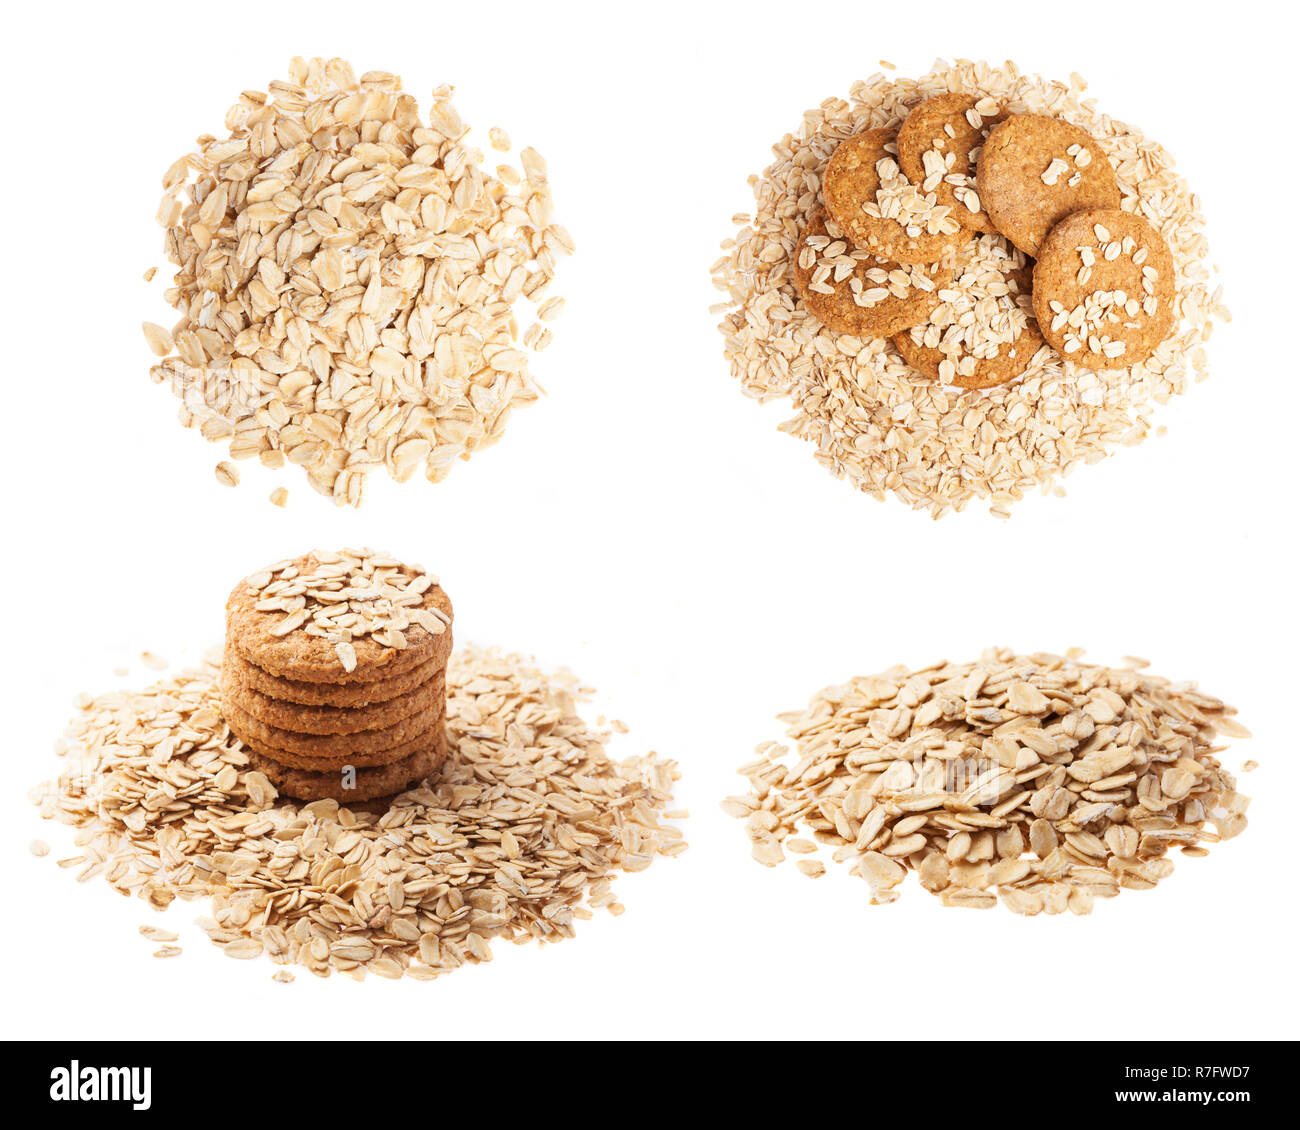 collection of oats isolated on white background Stock Photo